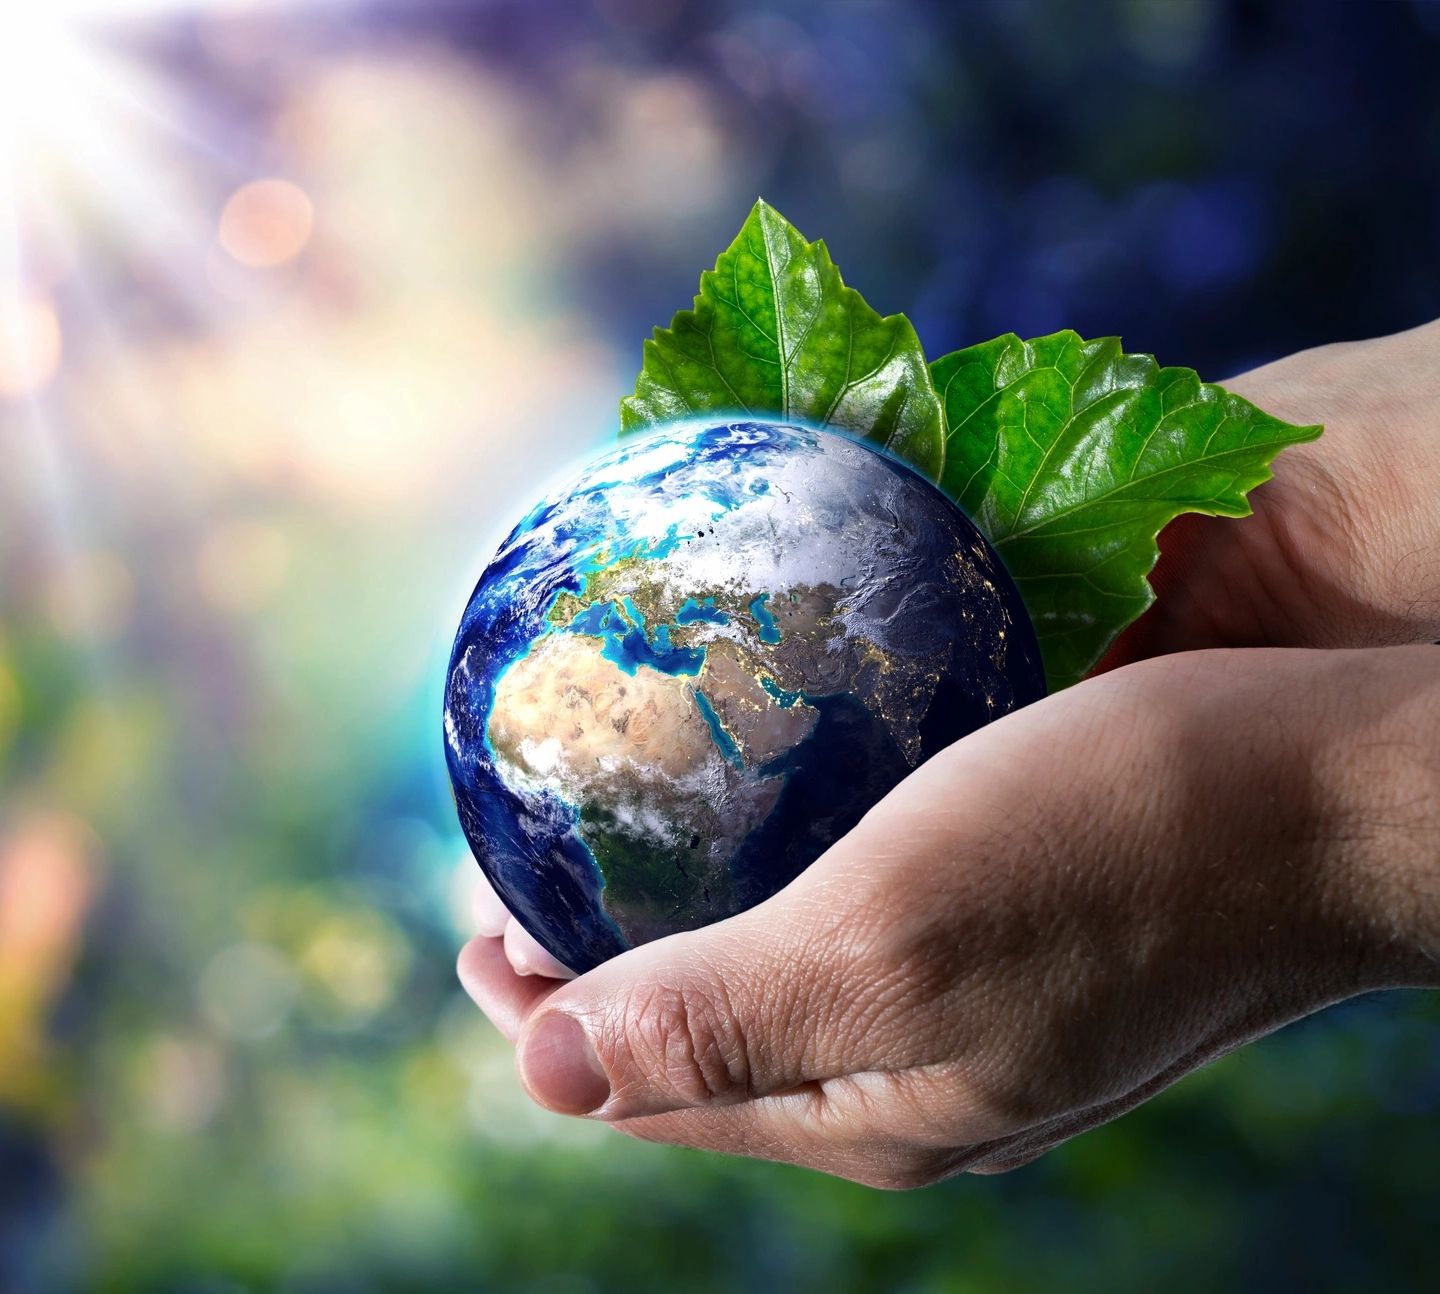 hands holding image of planet earth with leaves